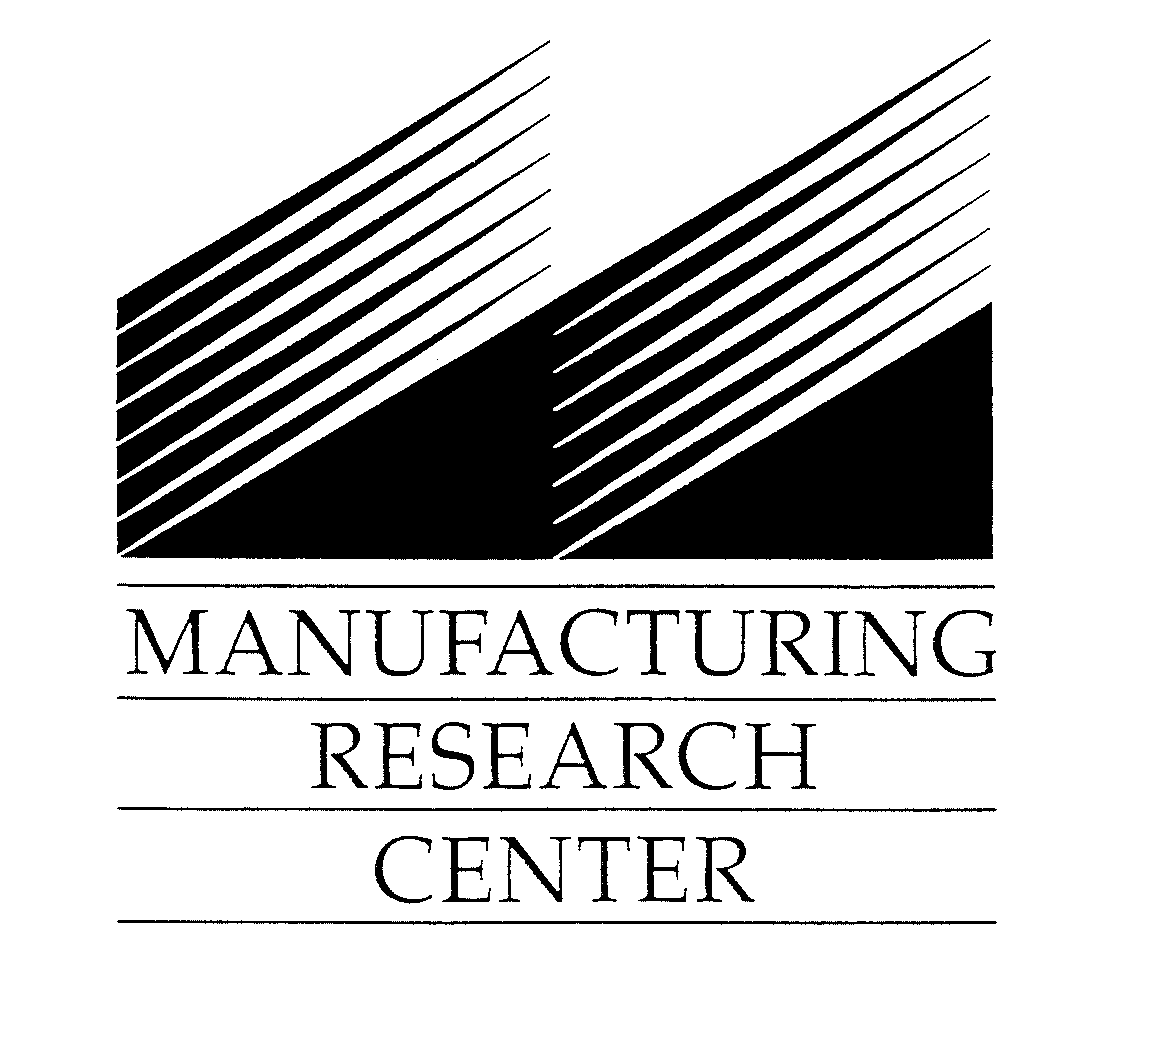  MANUFACTURING RESEARCH CENTER